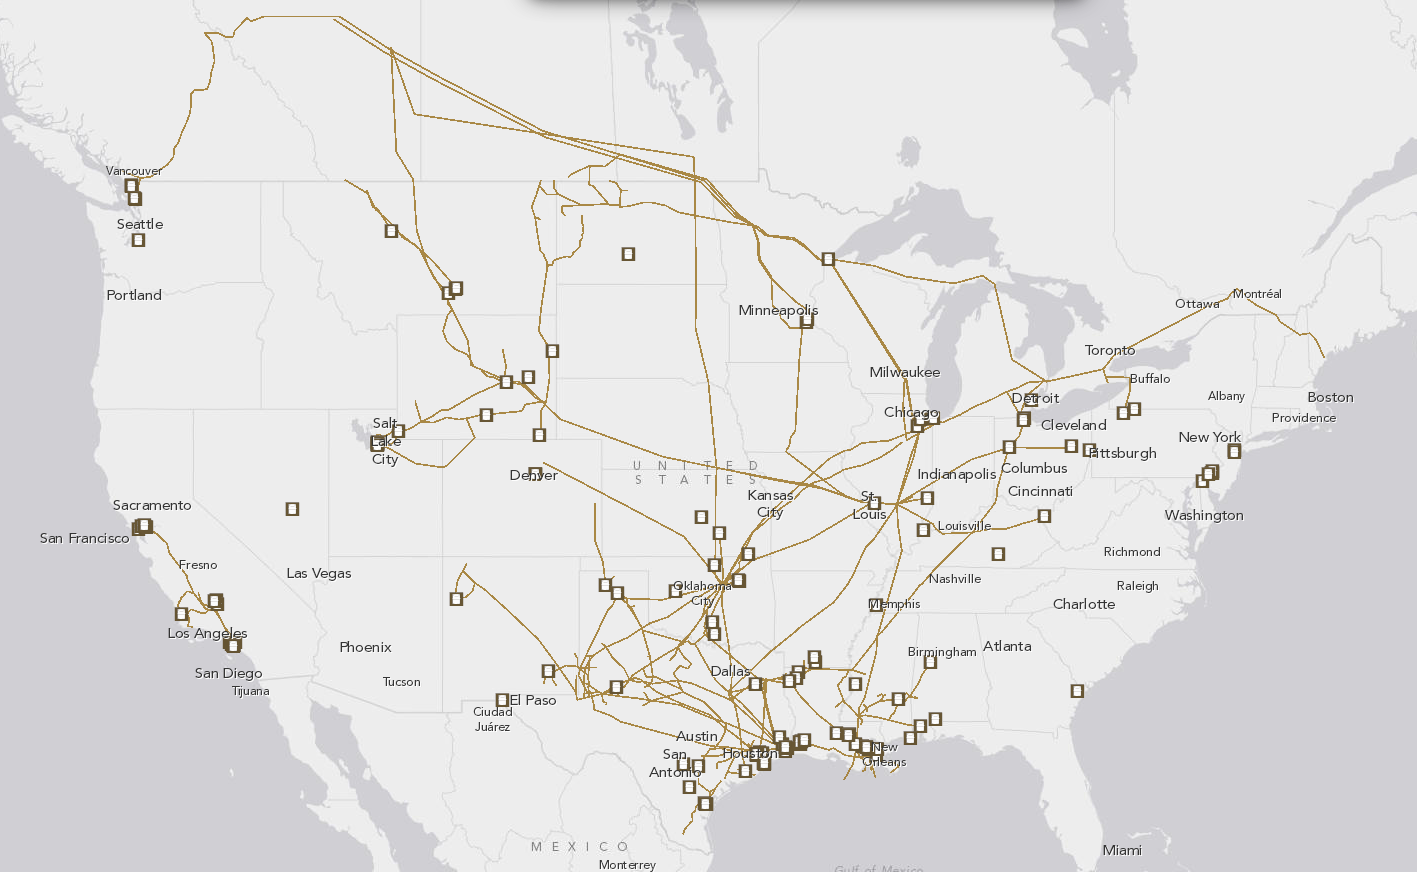 Oil_pipelines_and_refineries